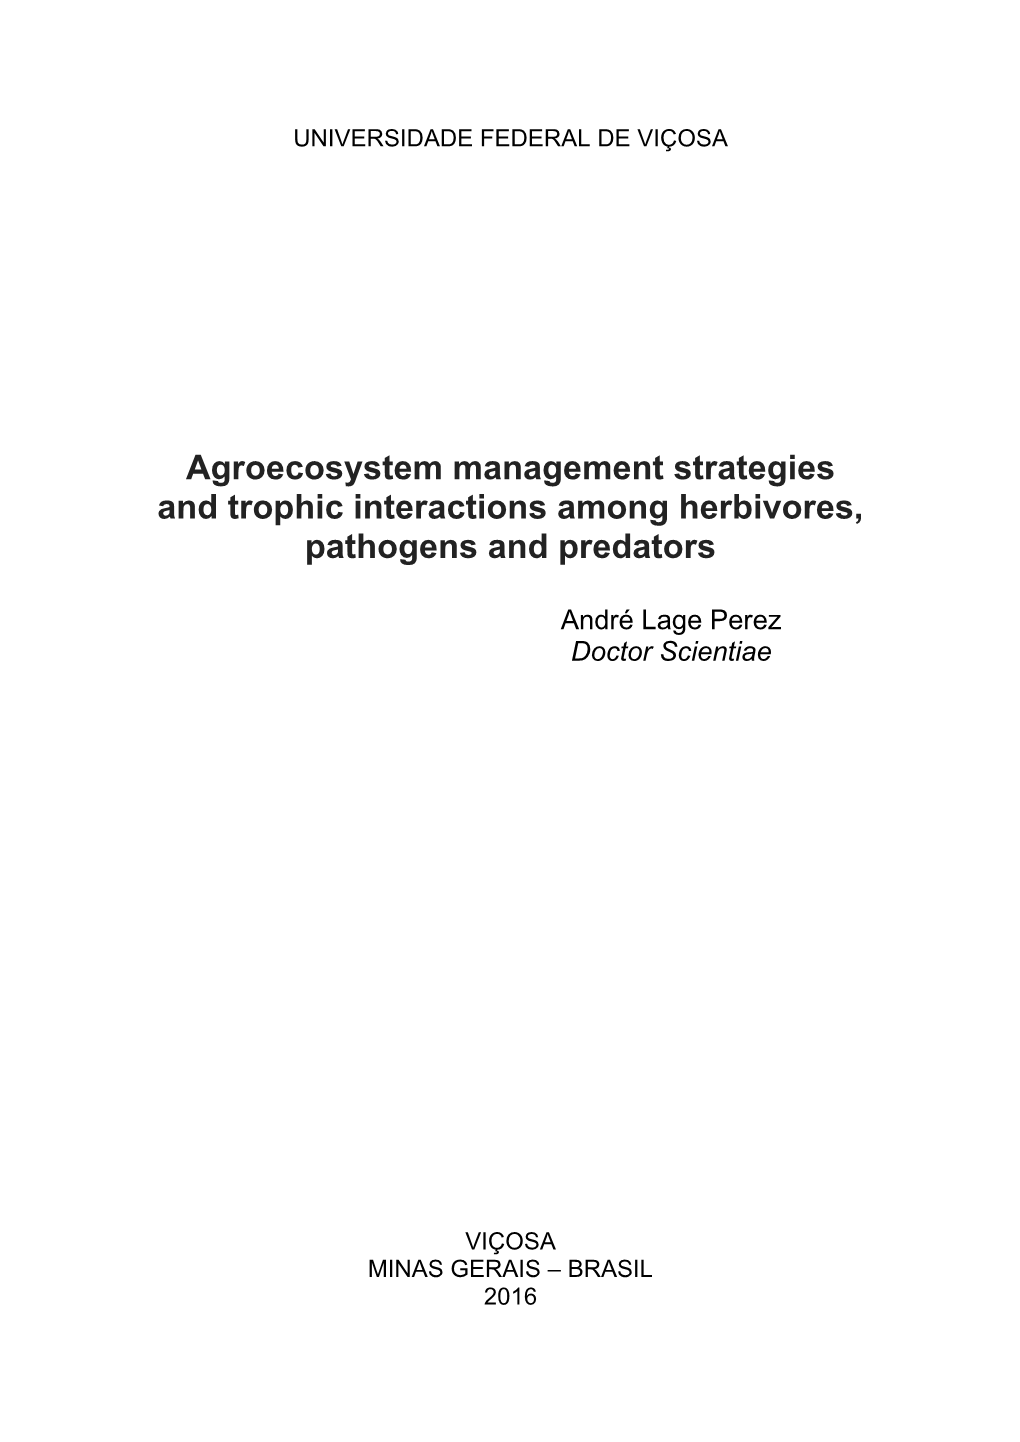 Agroecosystem Management Strategies and Trophic Interactions Among Herbivores, Pathogens and Predators